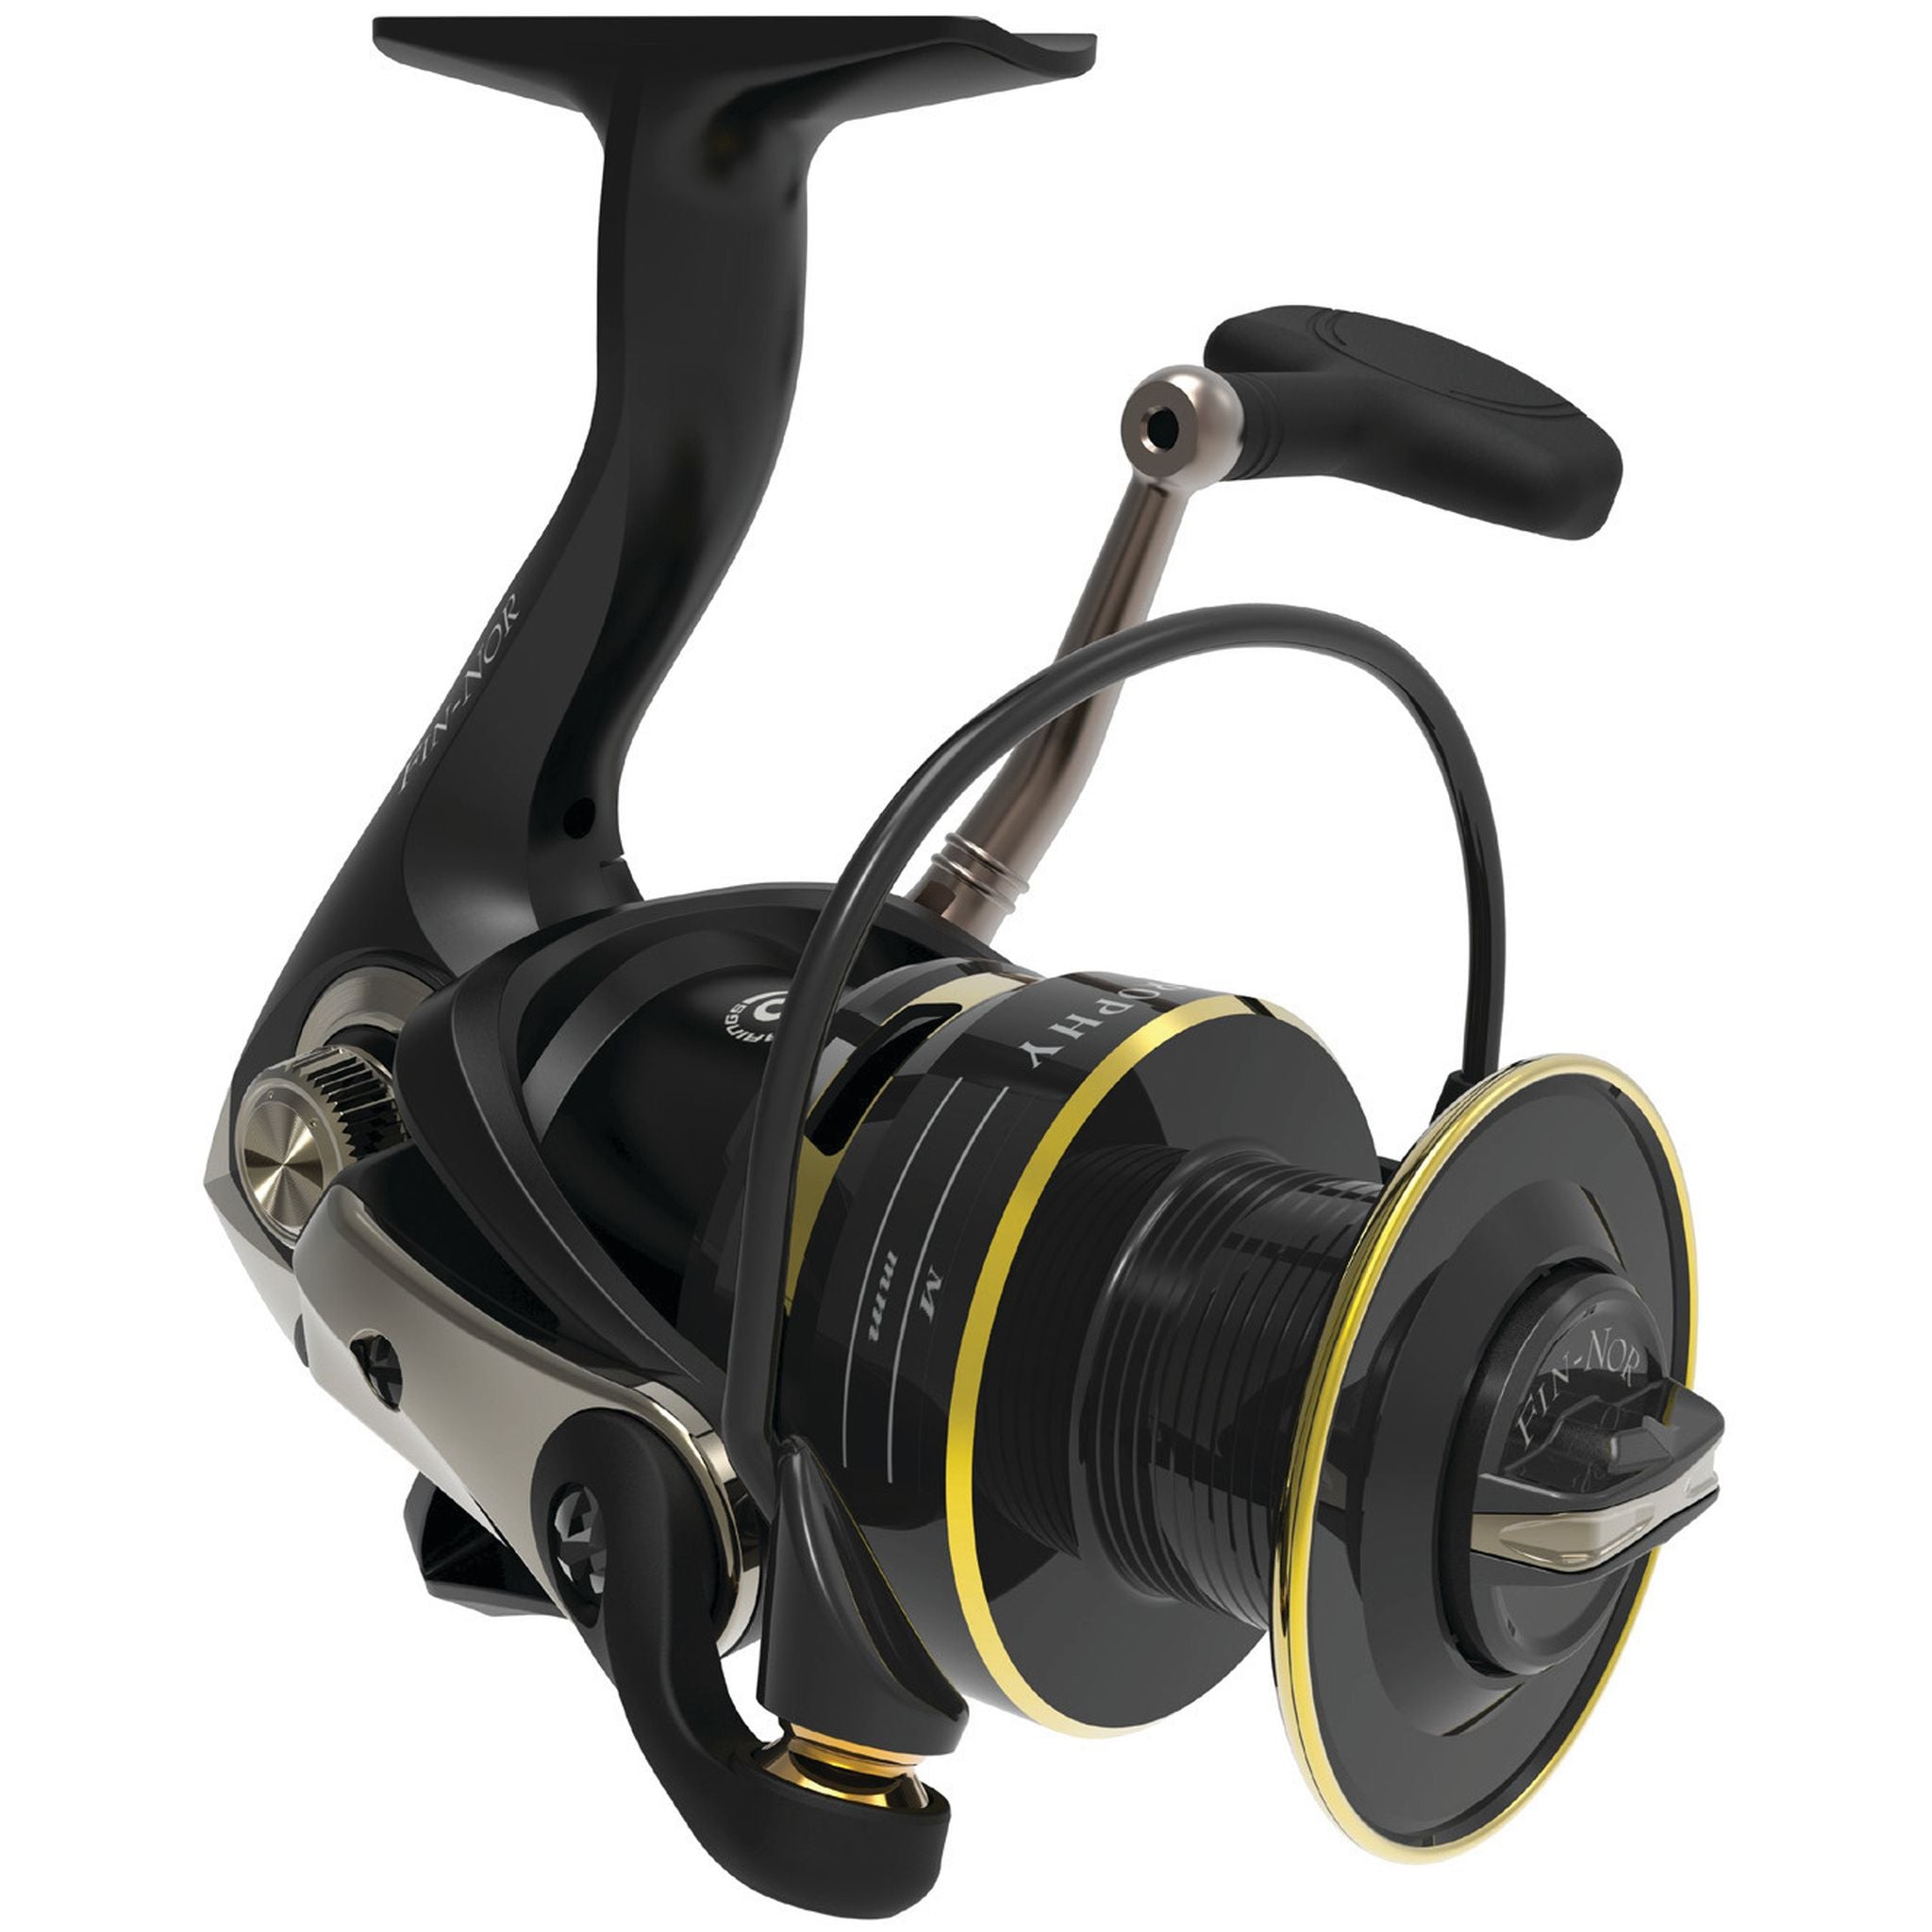 Fin-Nor Trophy TRO80 Spinning Fishing Reel